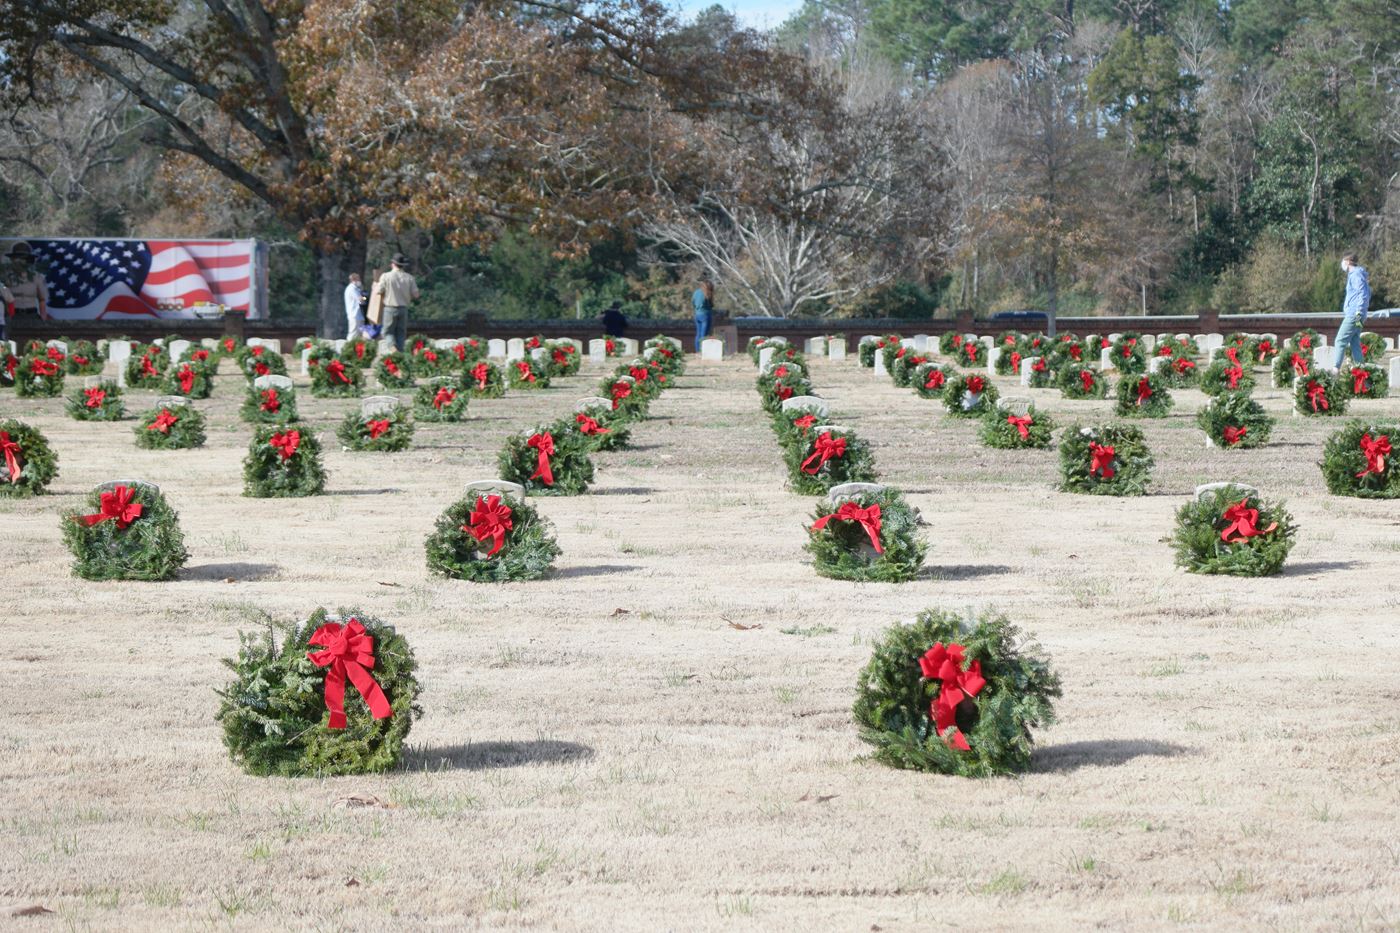 The wreaths were placed on the gravesites of Andersonville National Cemtery to remember and honor fallen heroes.